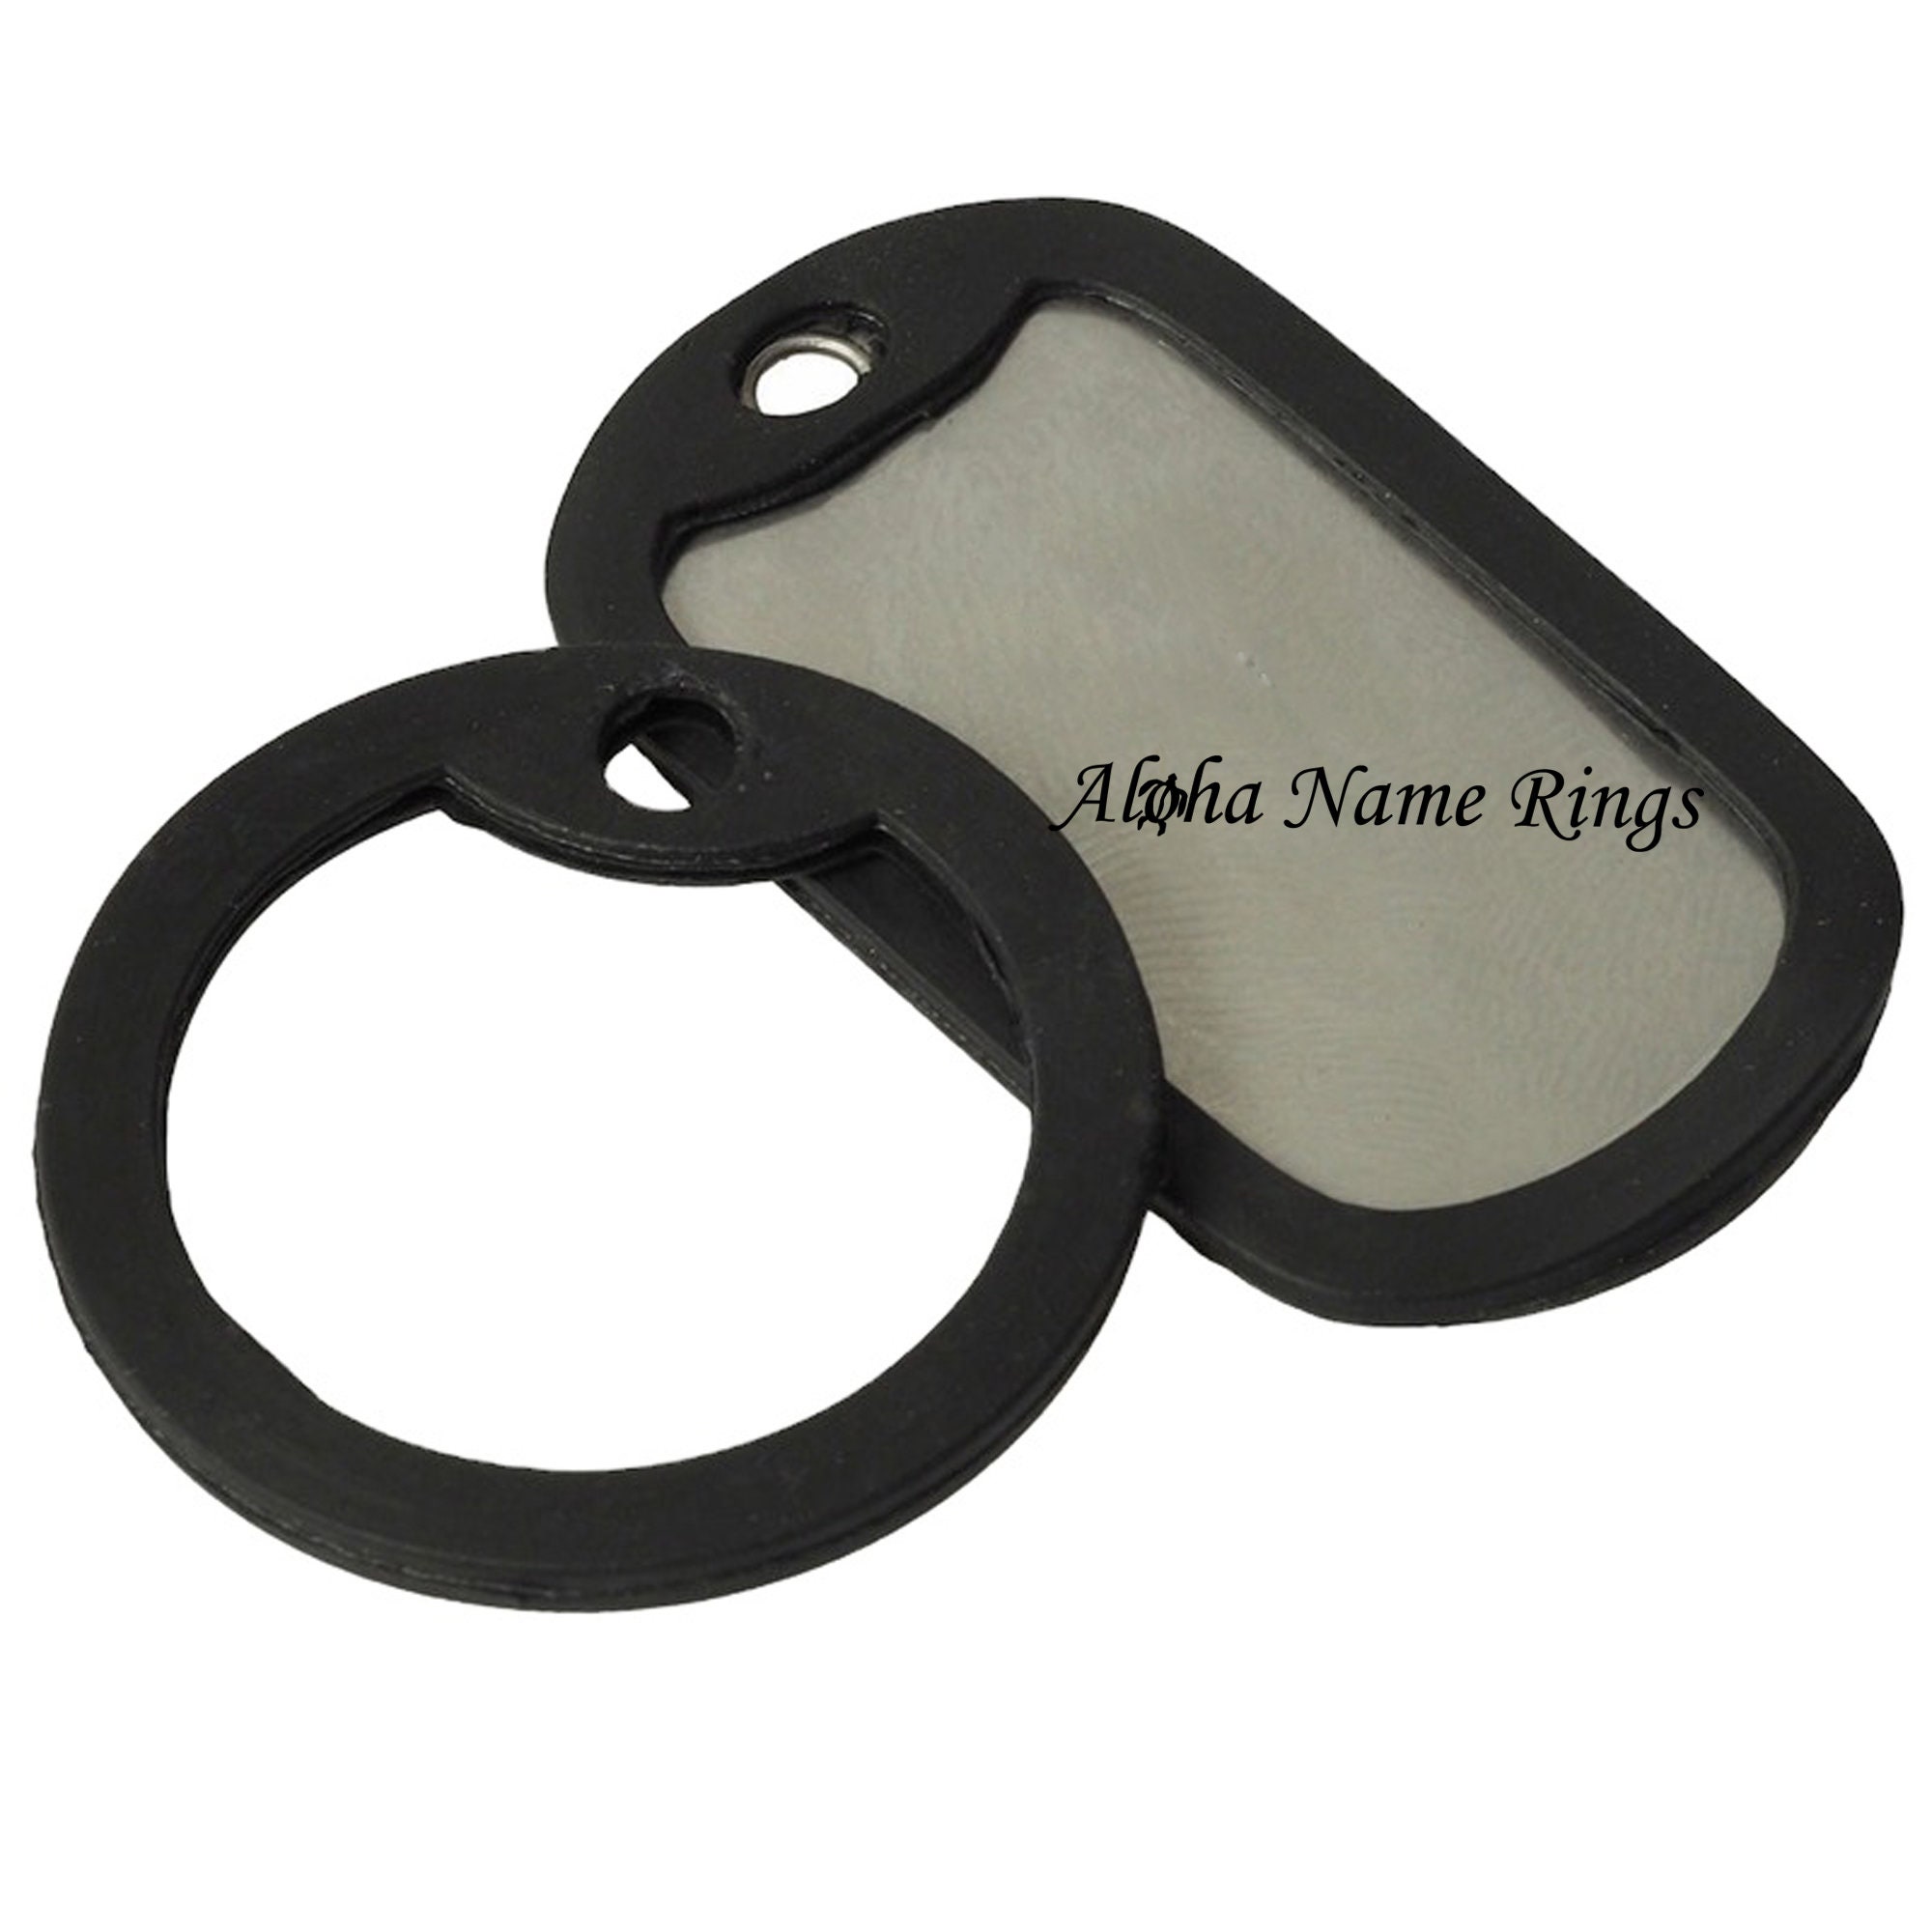 2-Piece 5ive Star Gear Dog Tag Silencer with Heavyweight Rubber Construction 